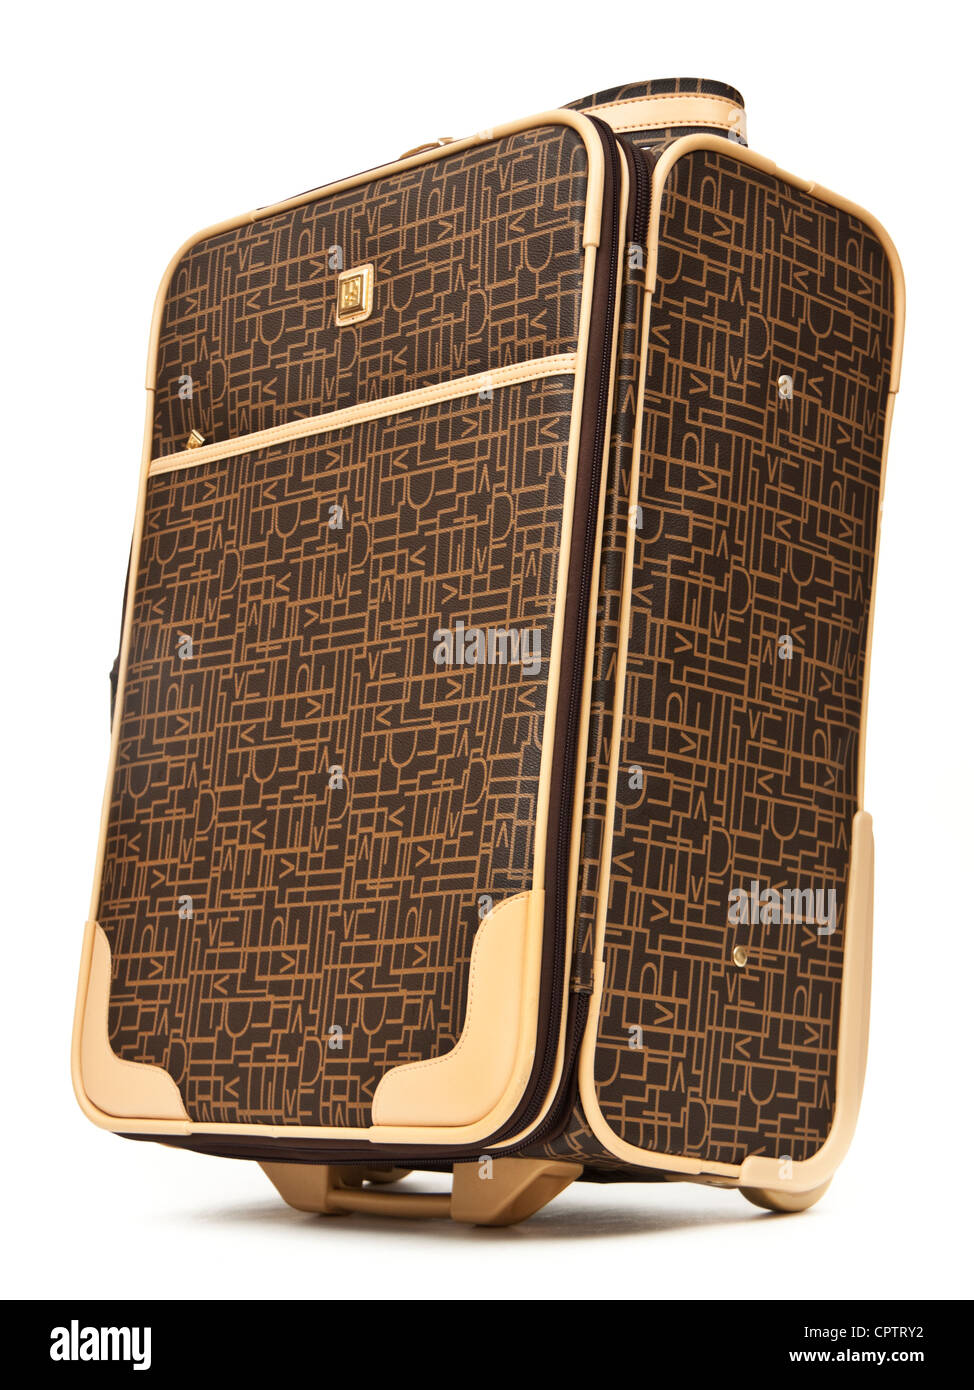 Sold at Auction: Louis Vuitton 3 Stratos Suitcase Set Trunk Pyramid Display  VTG Luggage